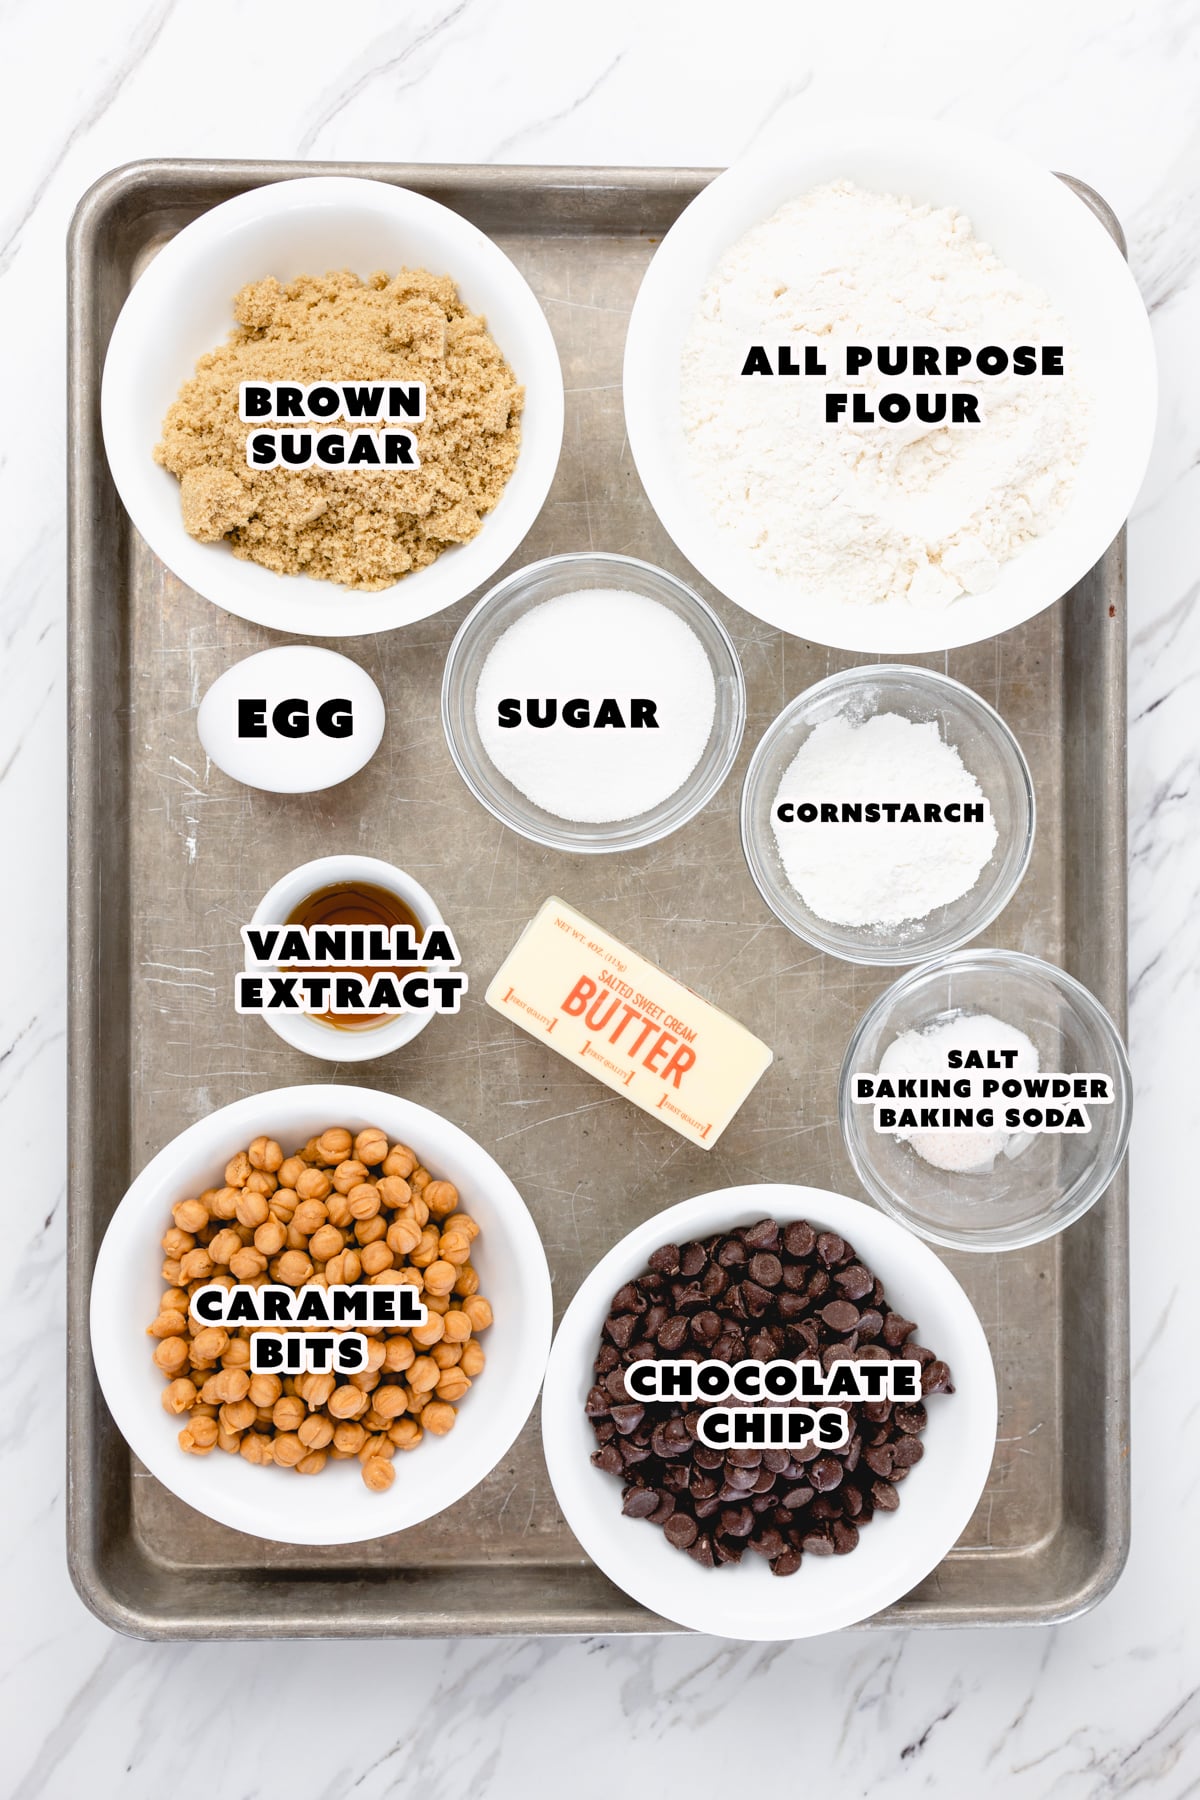 Top view of the ingredients needed to make caramel chocolate chip cookies in small bowls on a baking tray.